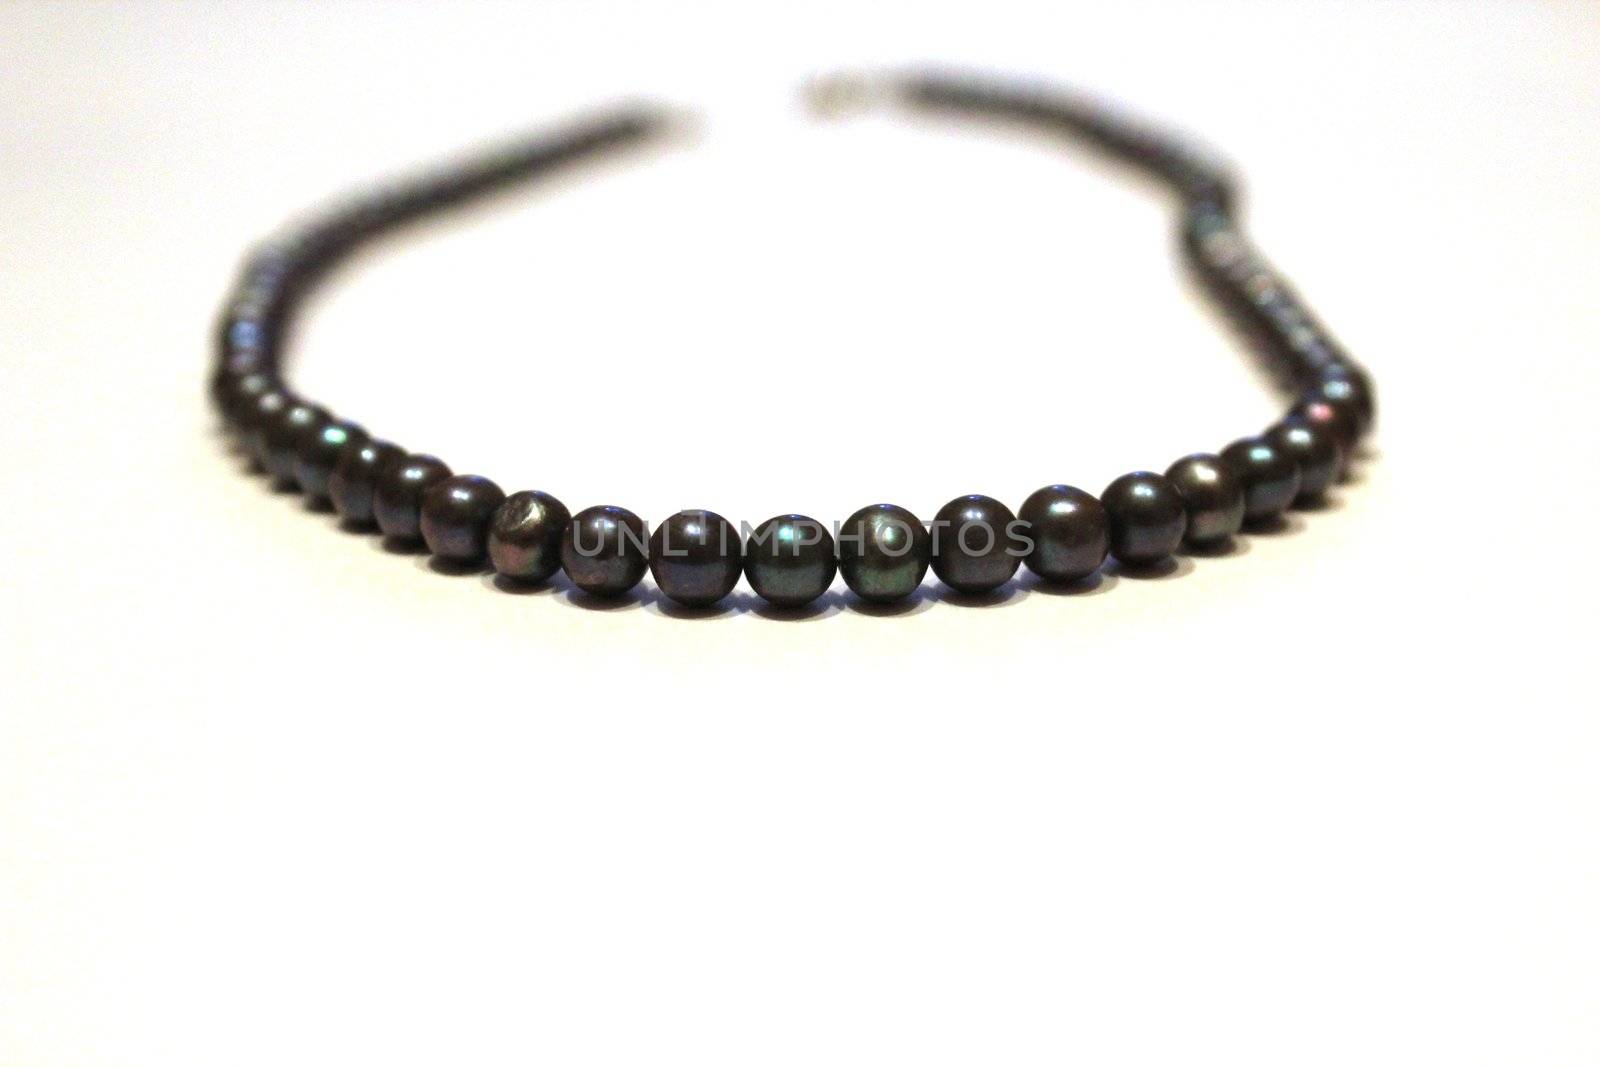 necklace of black pearls by Metanna